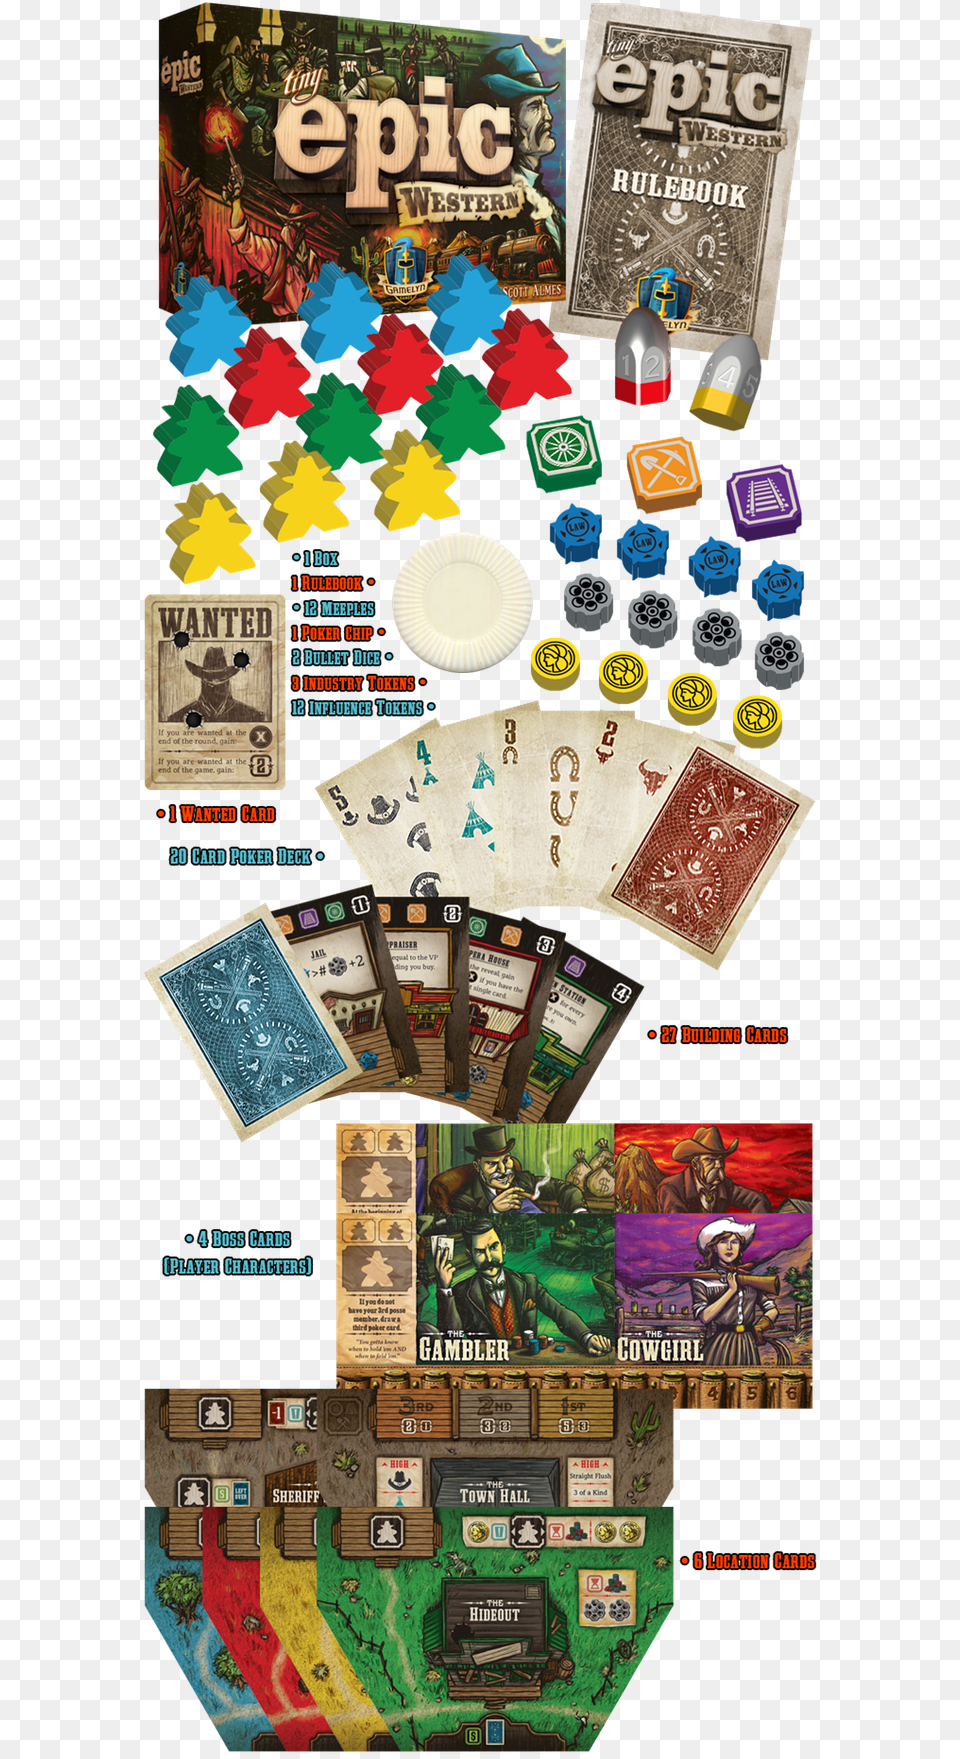 Tiny Epic Wester In Box Tiny Epic Western Board Game, Person, Art, Collage, Advertisement Png Image